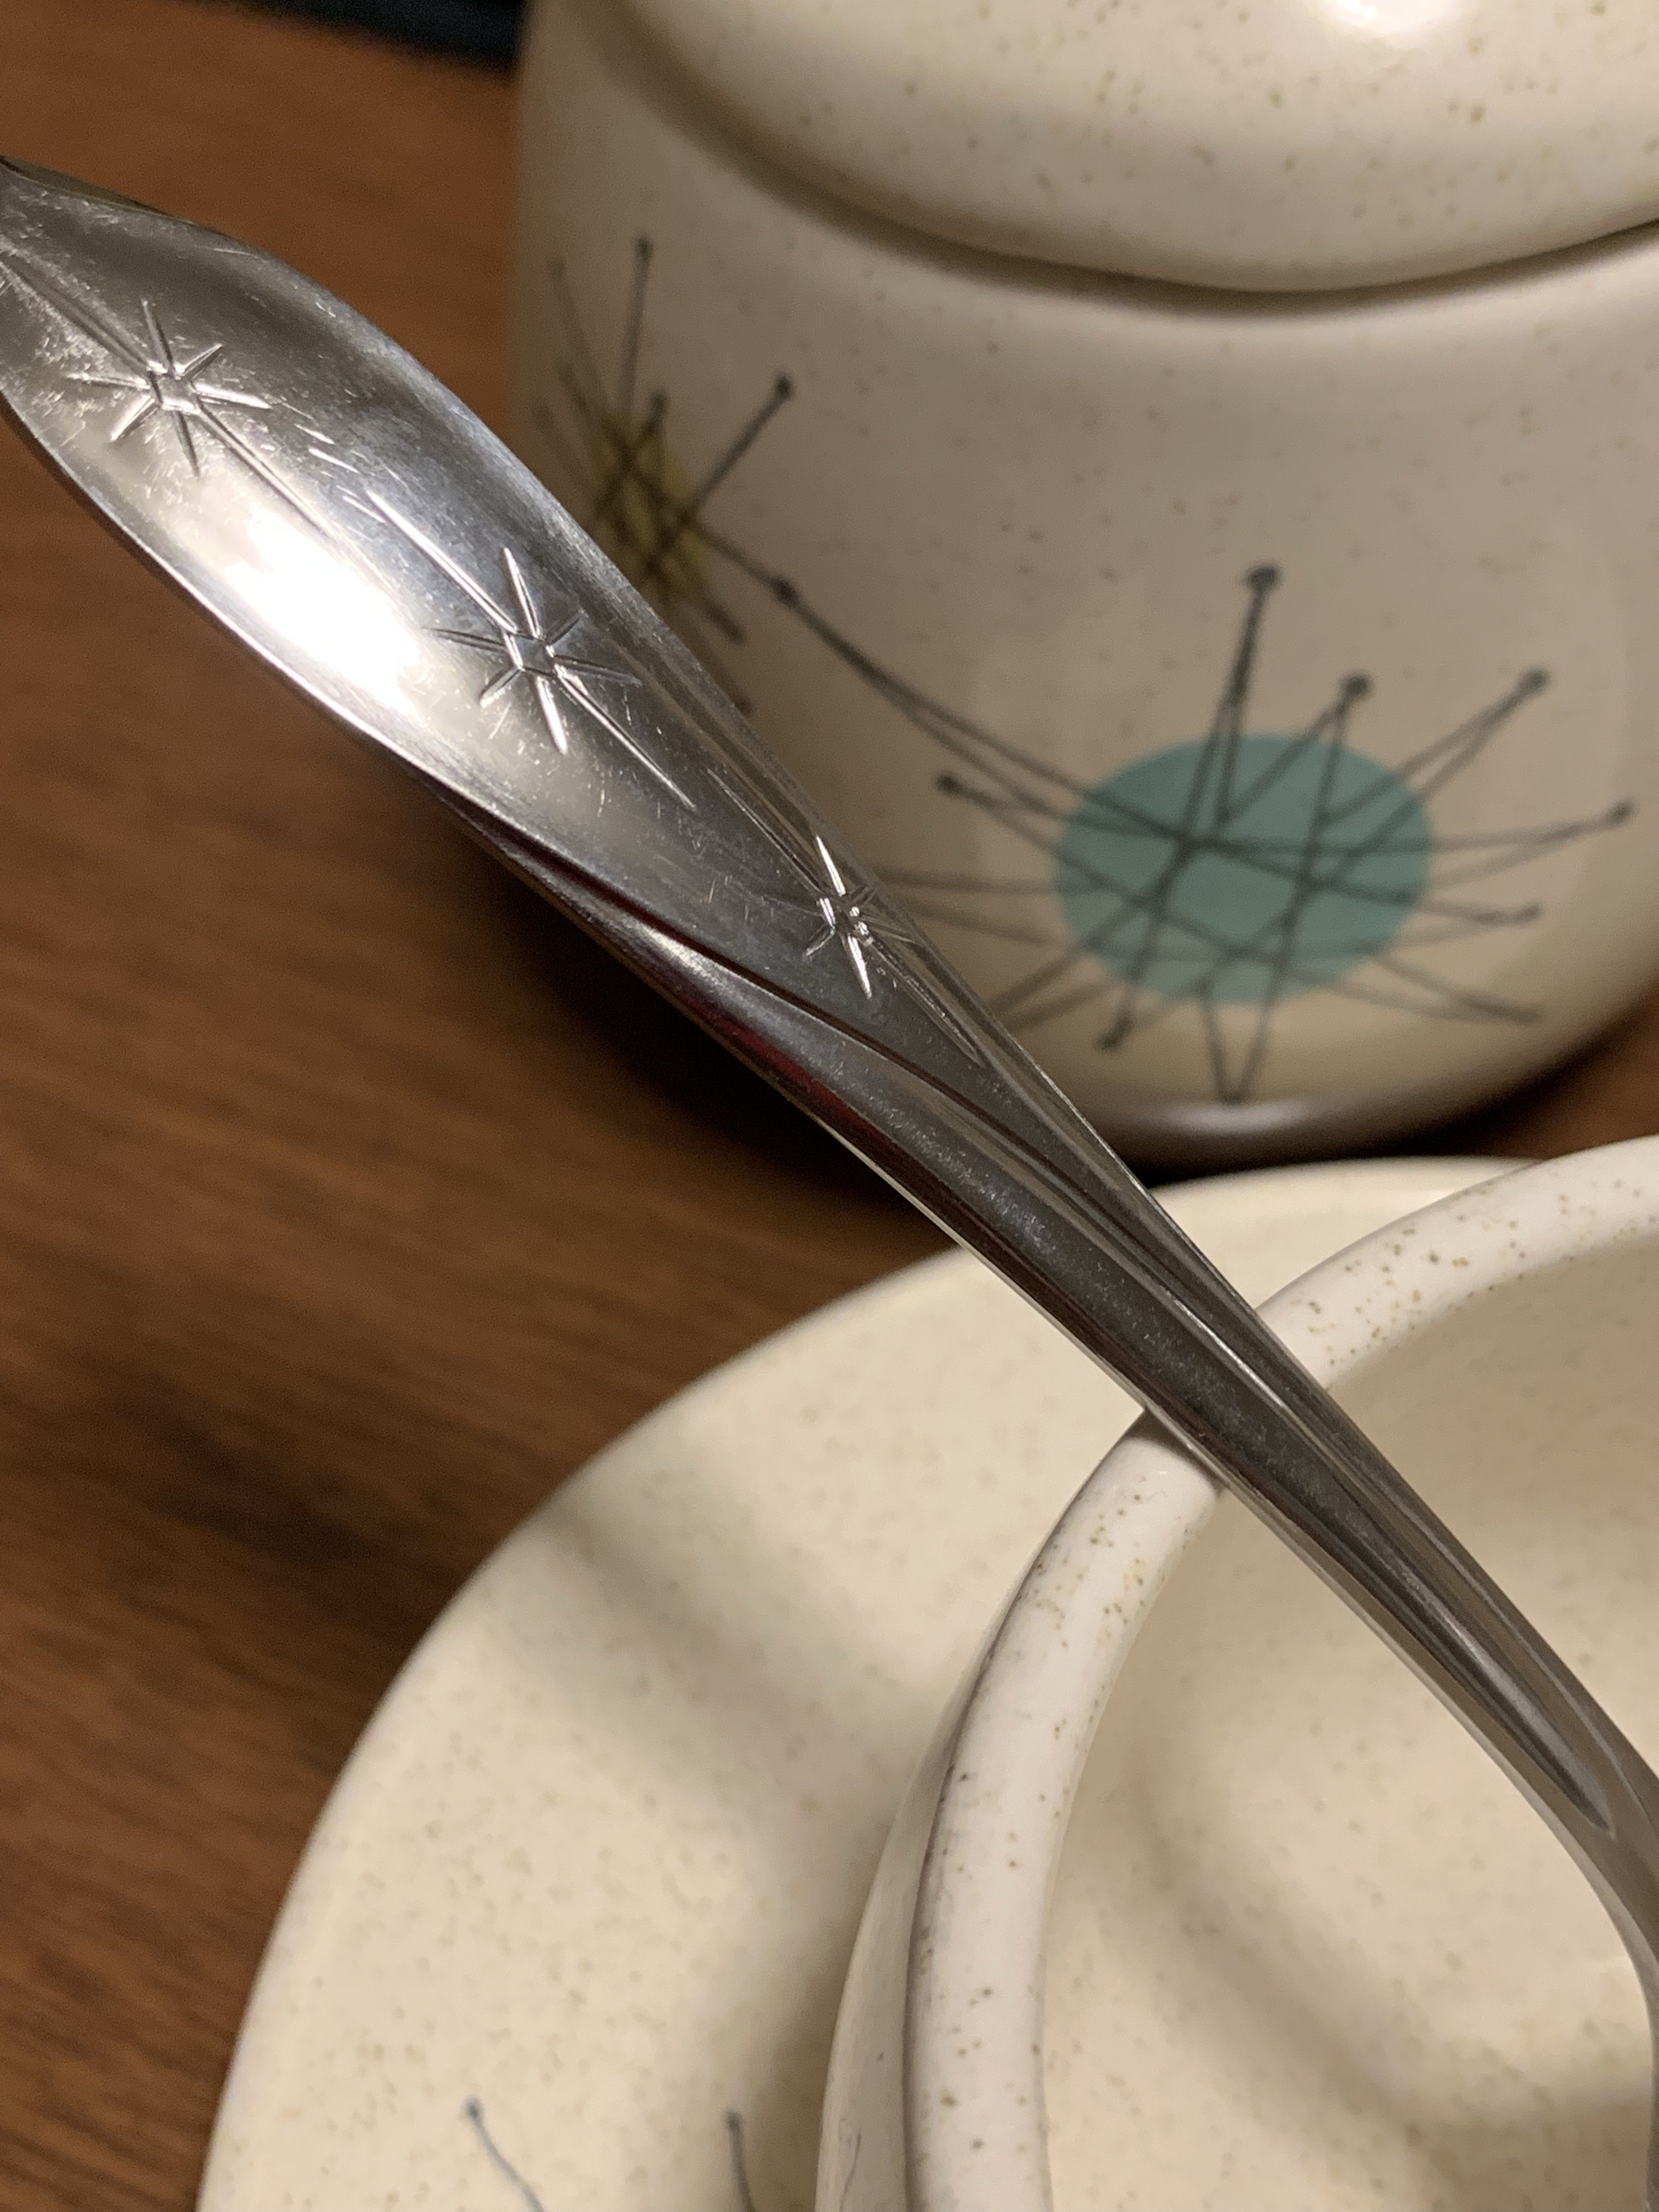 Silver flatware with star pattern.